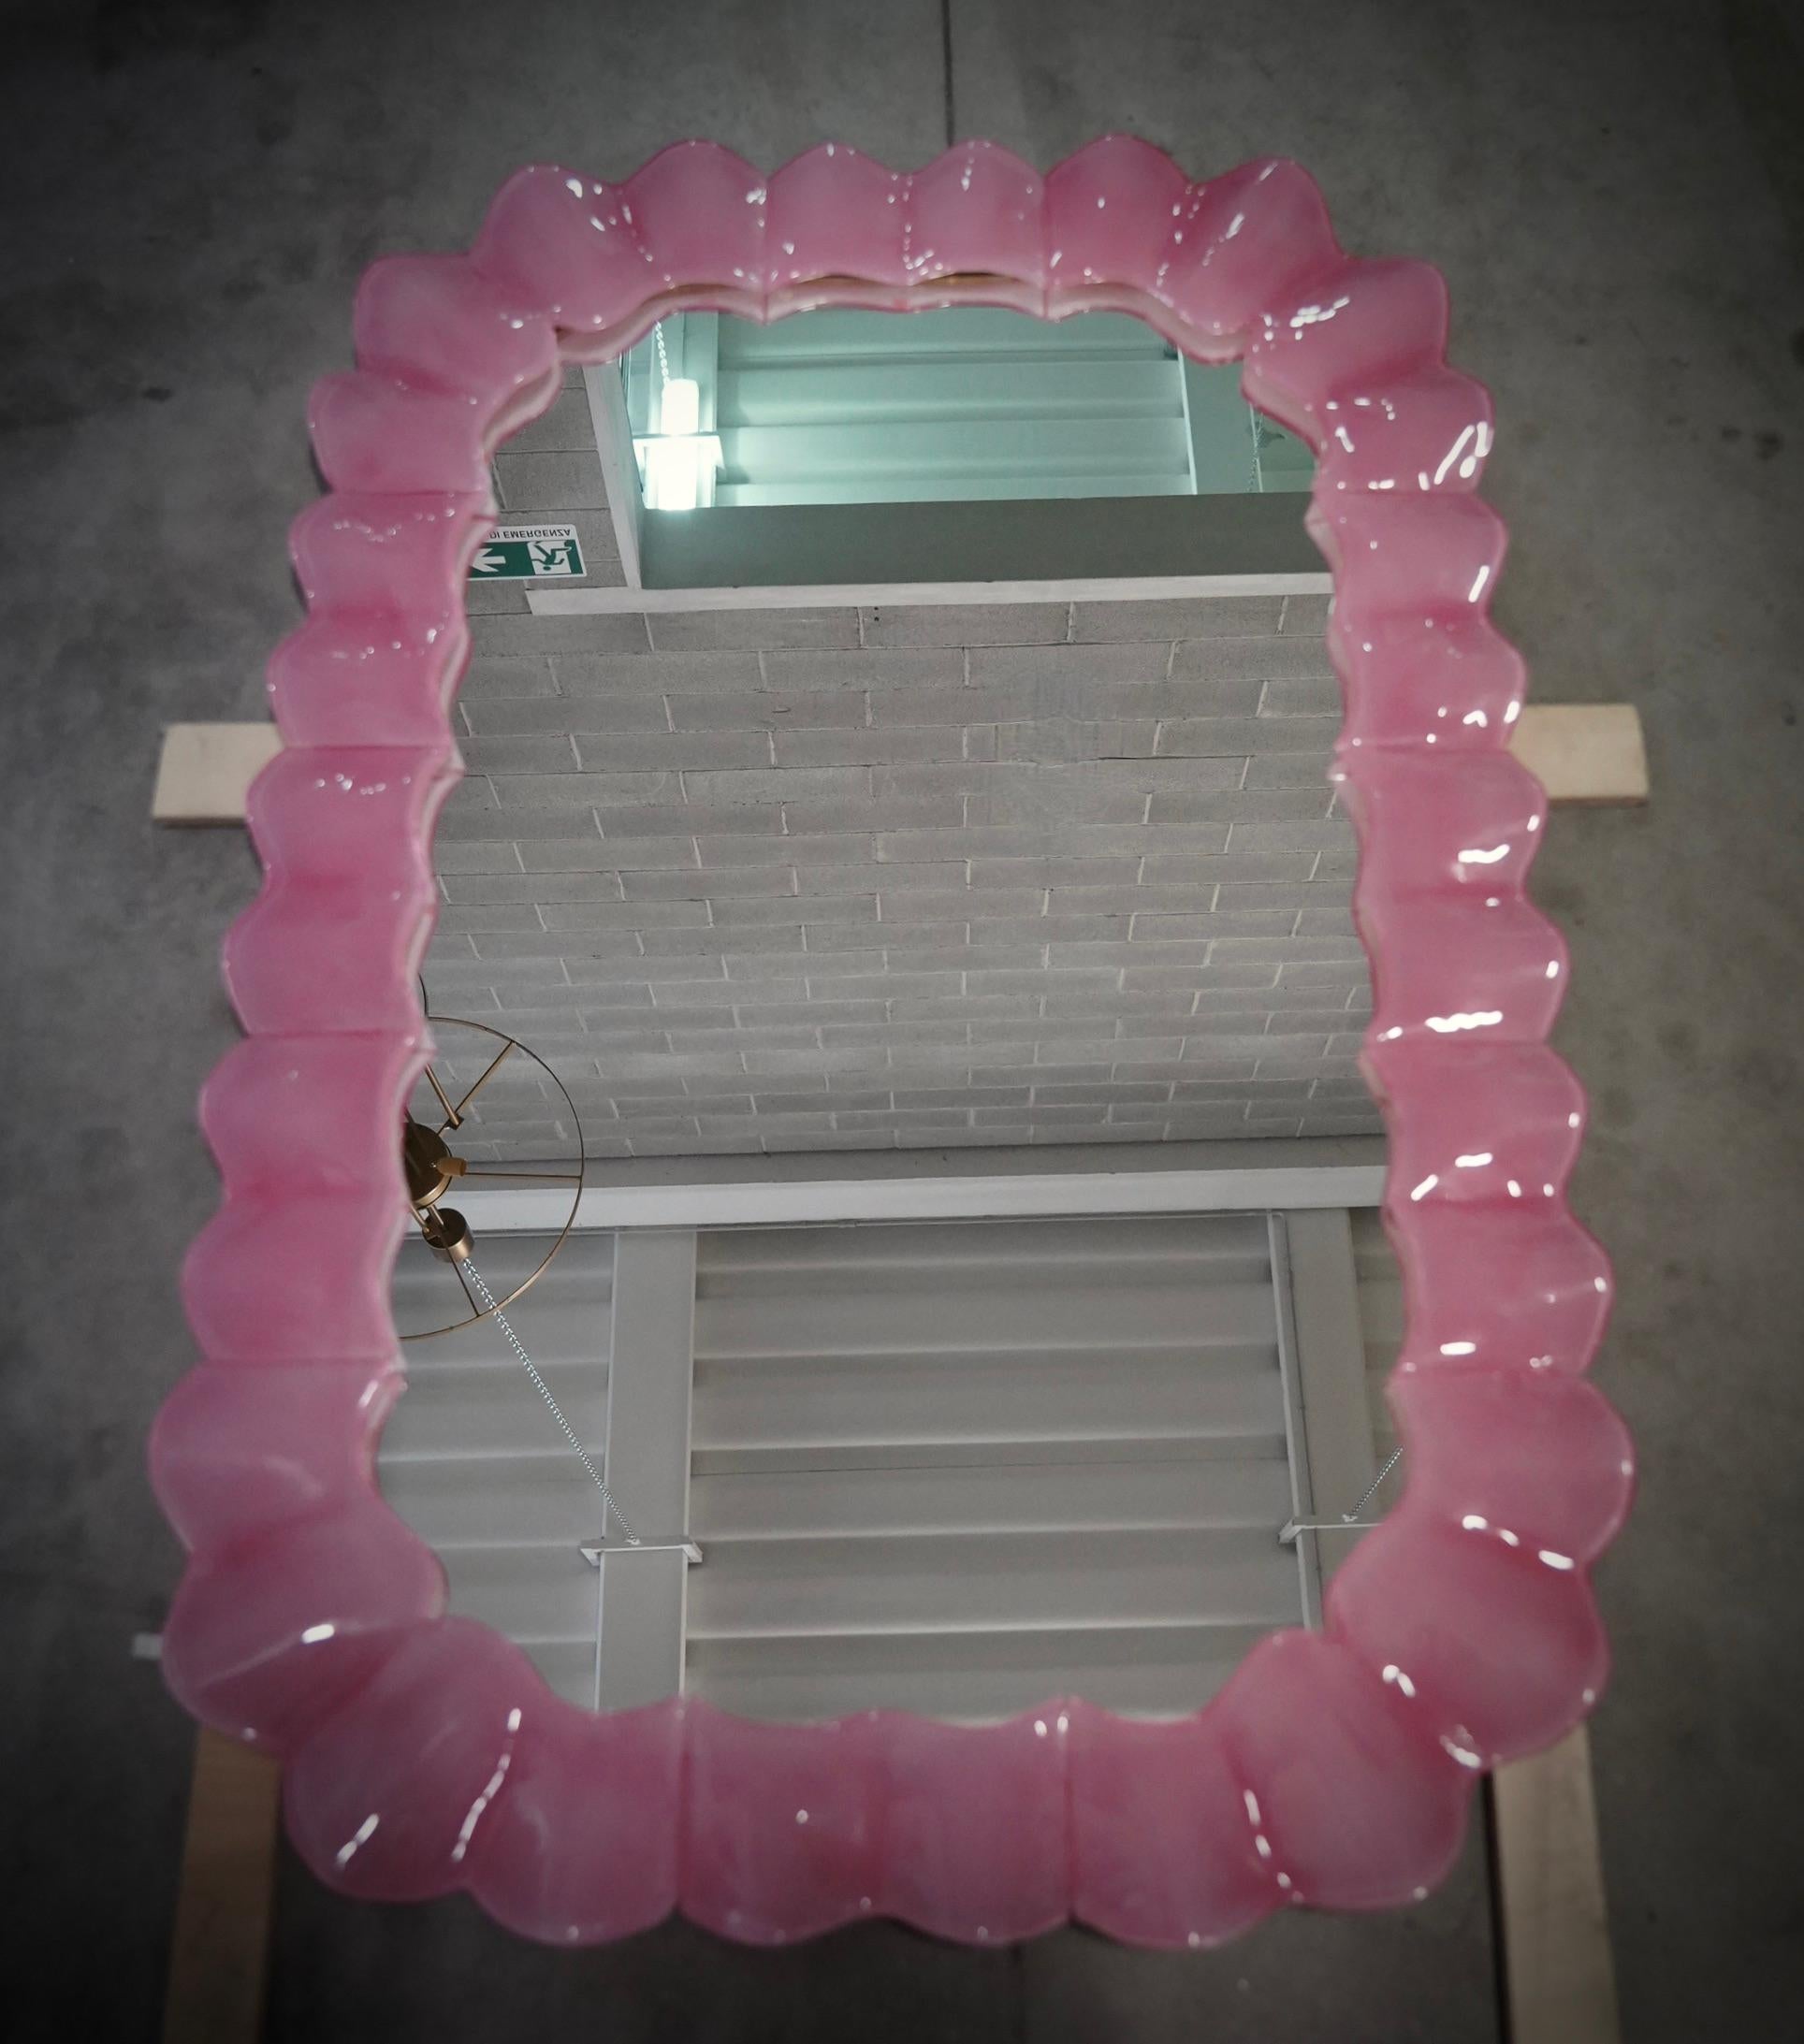 Splendid bright pink Murano glass mirror. A mirror that alone will furnish your home environment. Rich but tasteful, the mirror has a truly particular design, with a very beautiful shape of these glass sections.

The mirror has a wooden rear